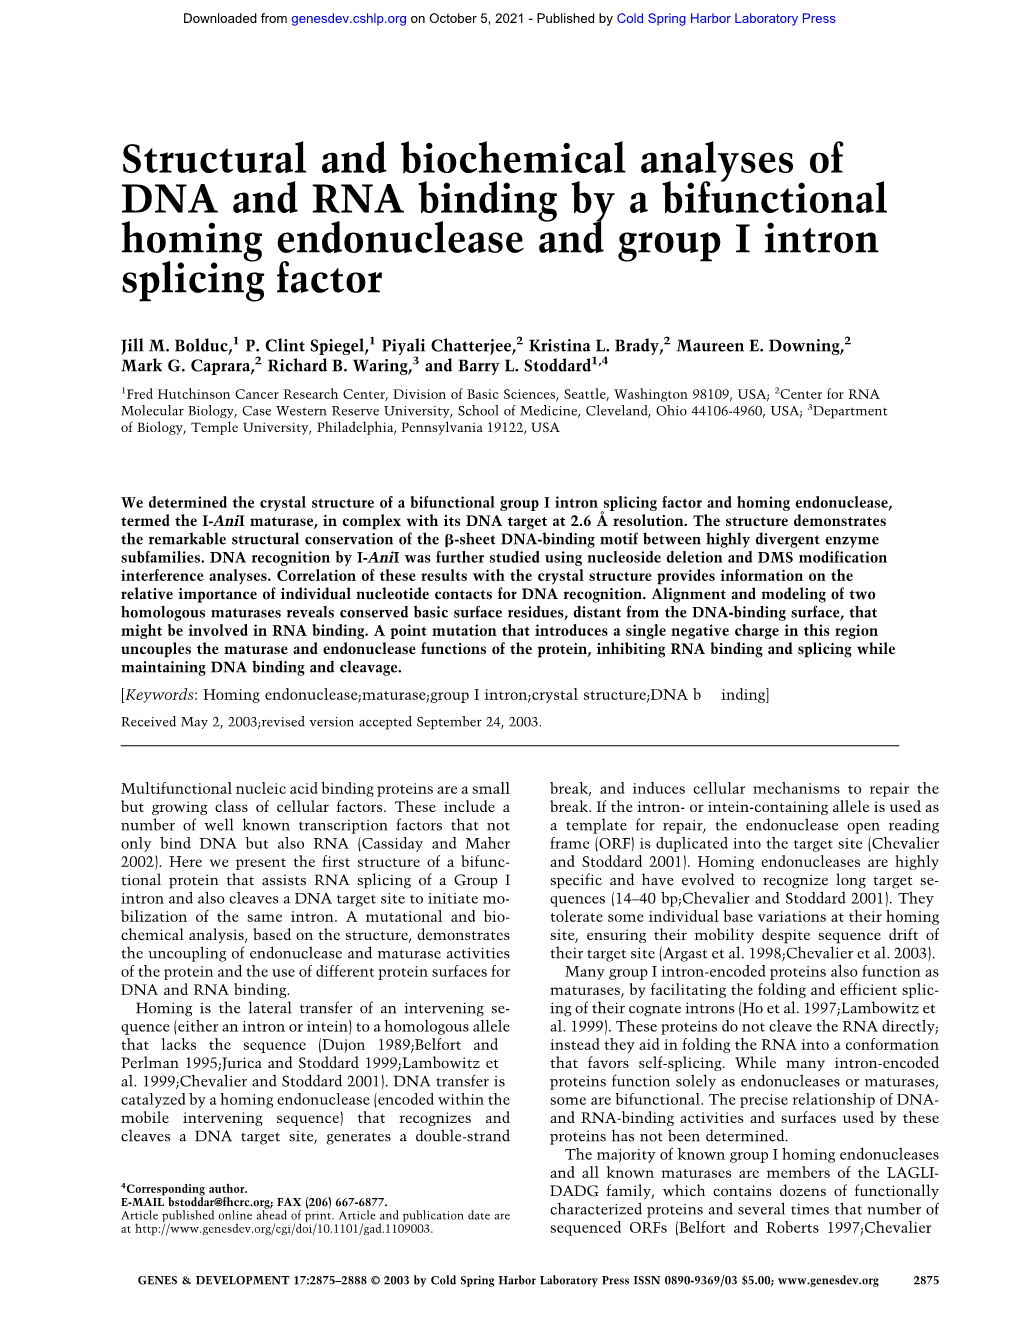 Structural and Biochemical Analyses of DNA and RNA Binding by a Bifunctional Homing Endonuclease and Group I Intron Splicing Factor